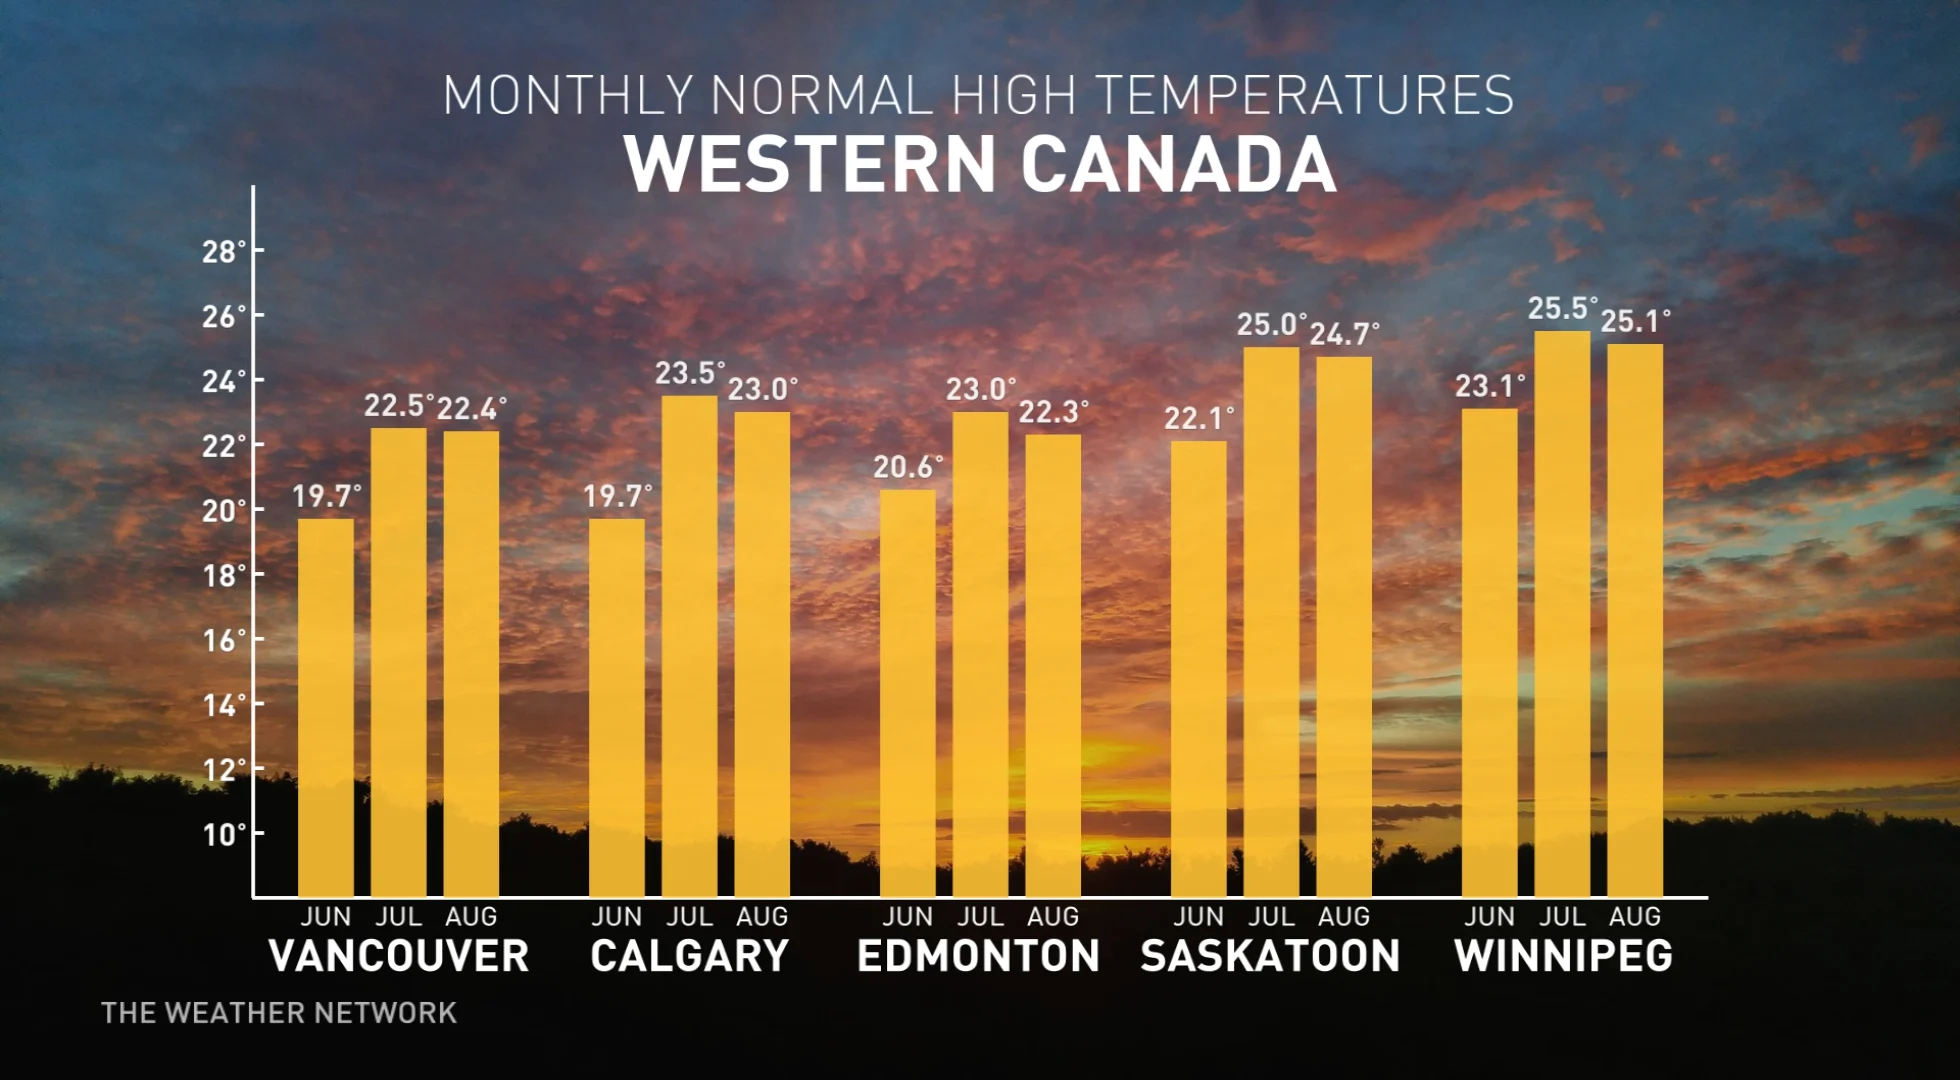 Western Canada - Summer Monthly Normal Temperatures for Summer June, July, August